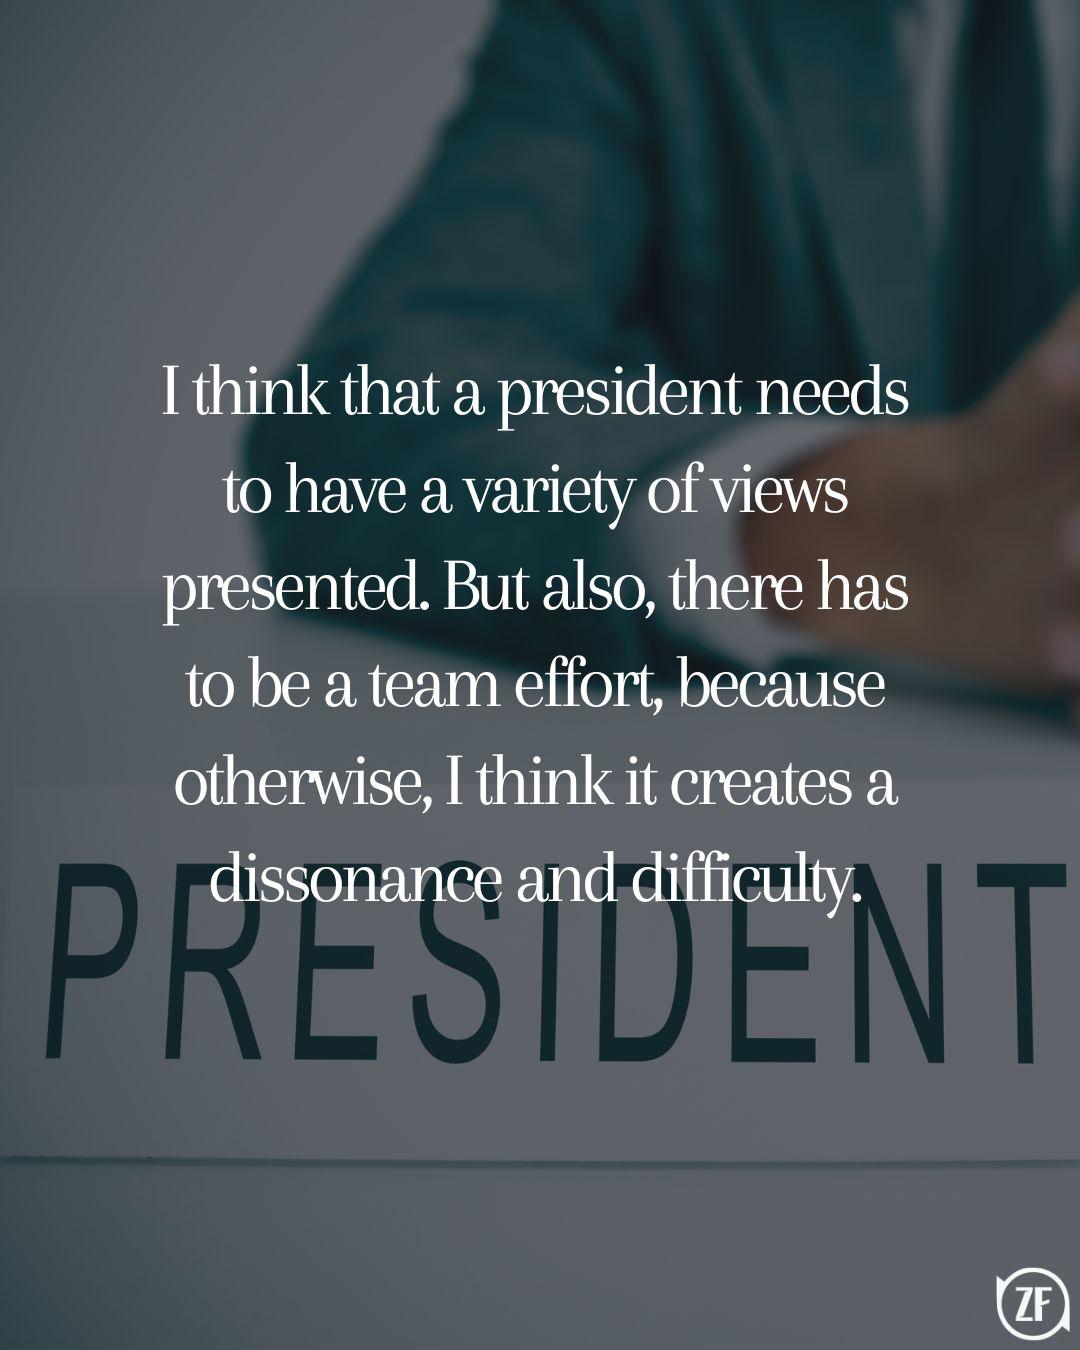 I think that a president needs to have a variety of views presented. But also, there has to be a team effort, because otherwise, I think it creates a dissonance and difficulty.